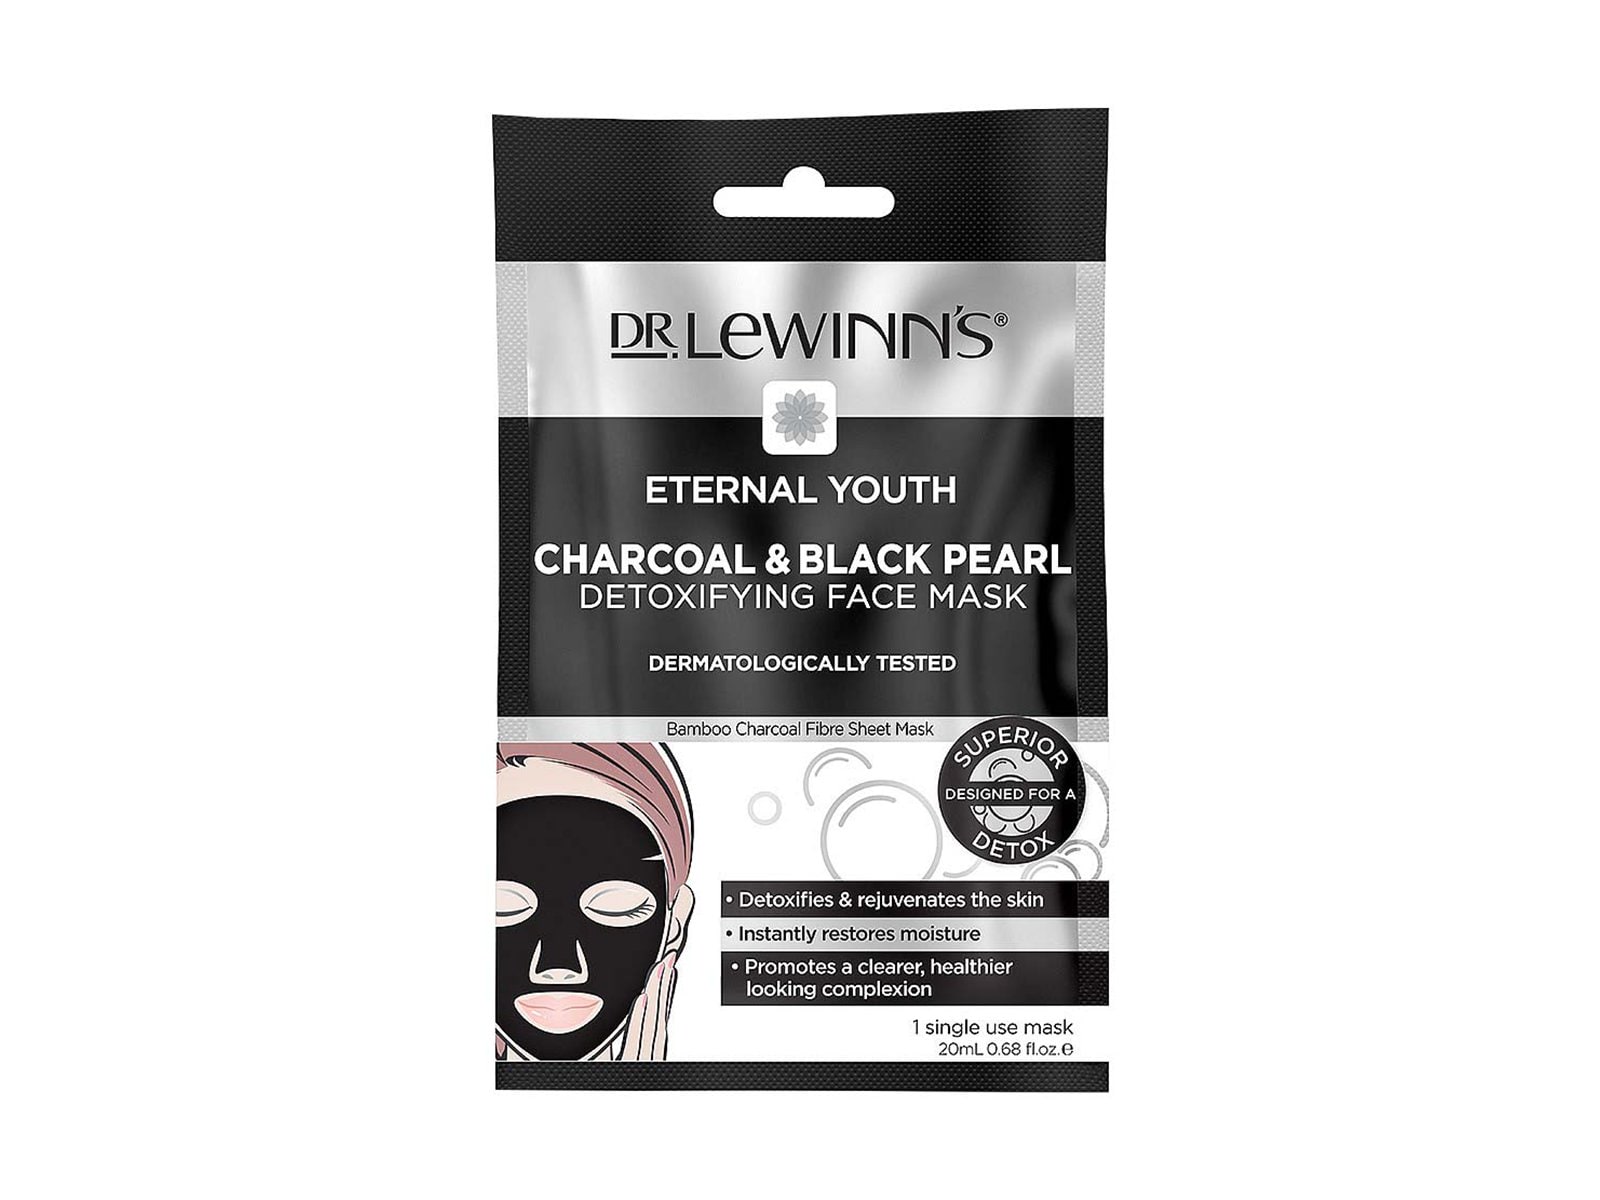 Dr. LeWinn’s Eternal Youth Charcoal and Black Pearl Detoxifying Face Mask, $11.99